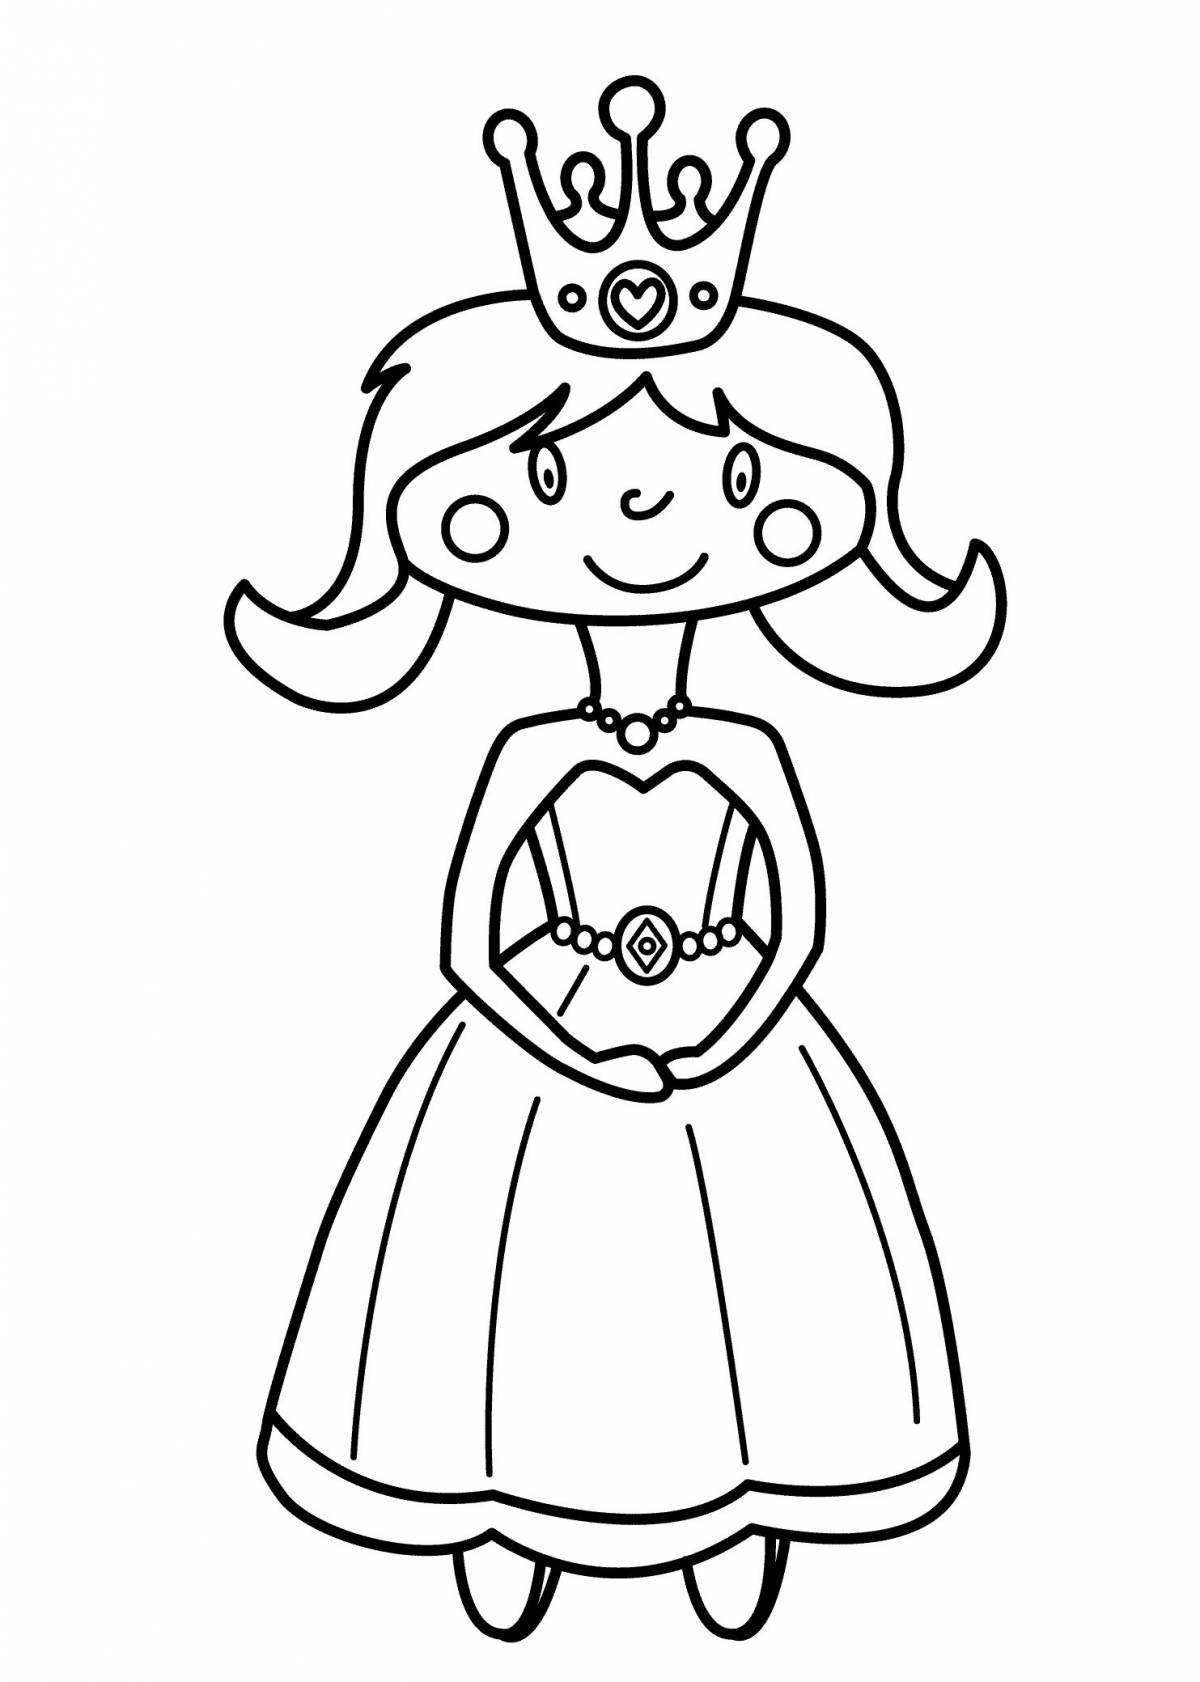 Playful coloring book for girls princesses 3-4 years old